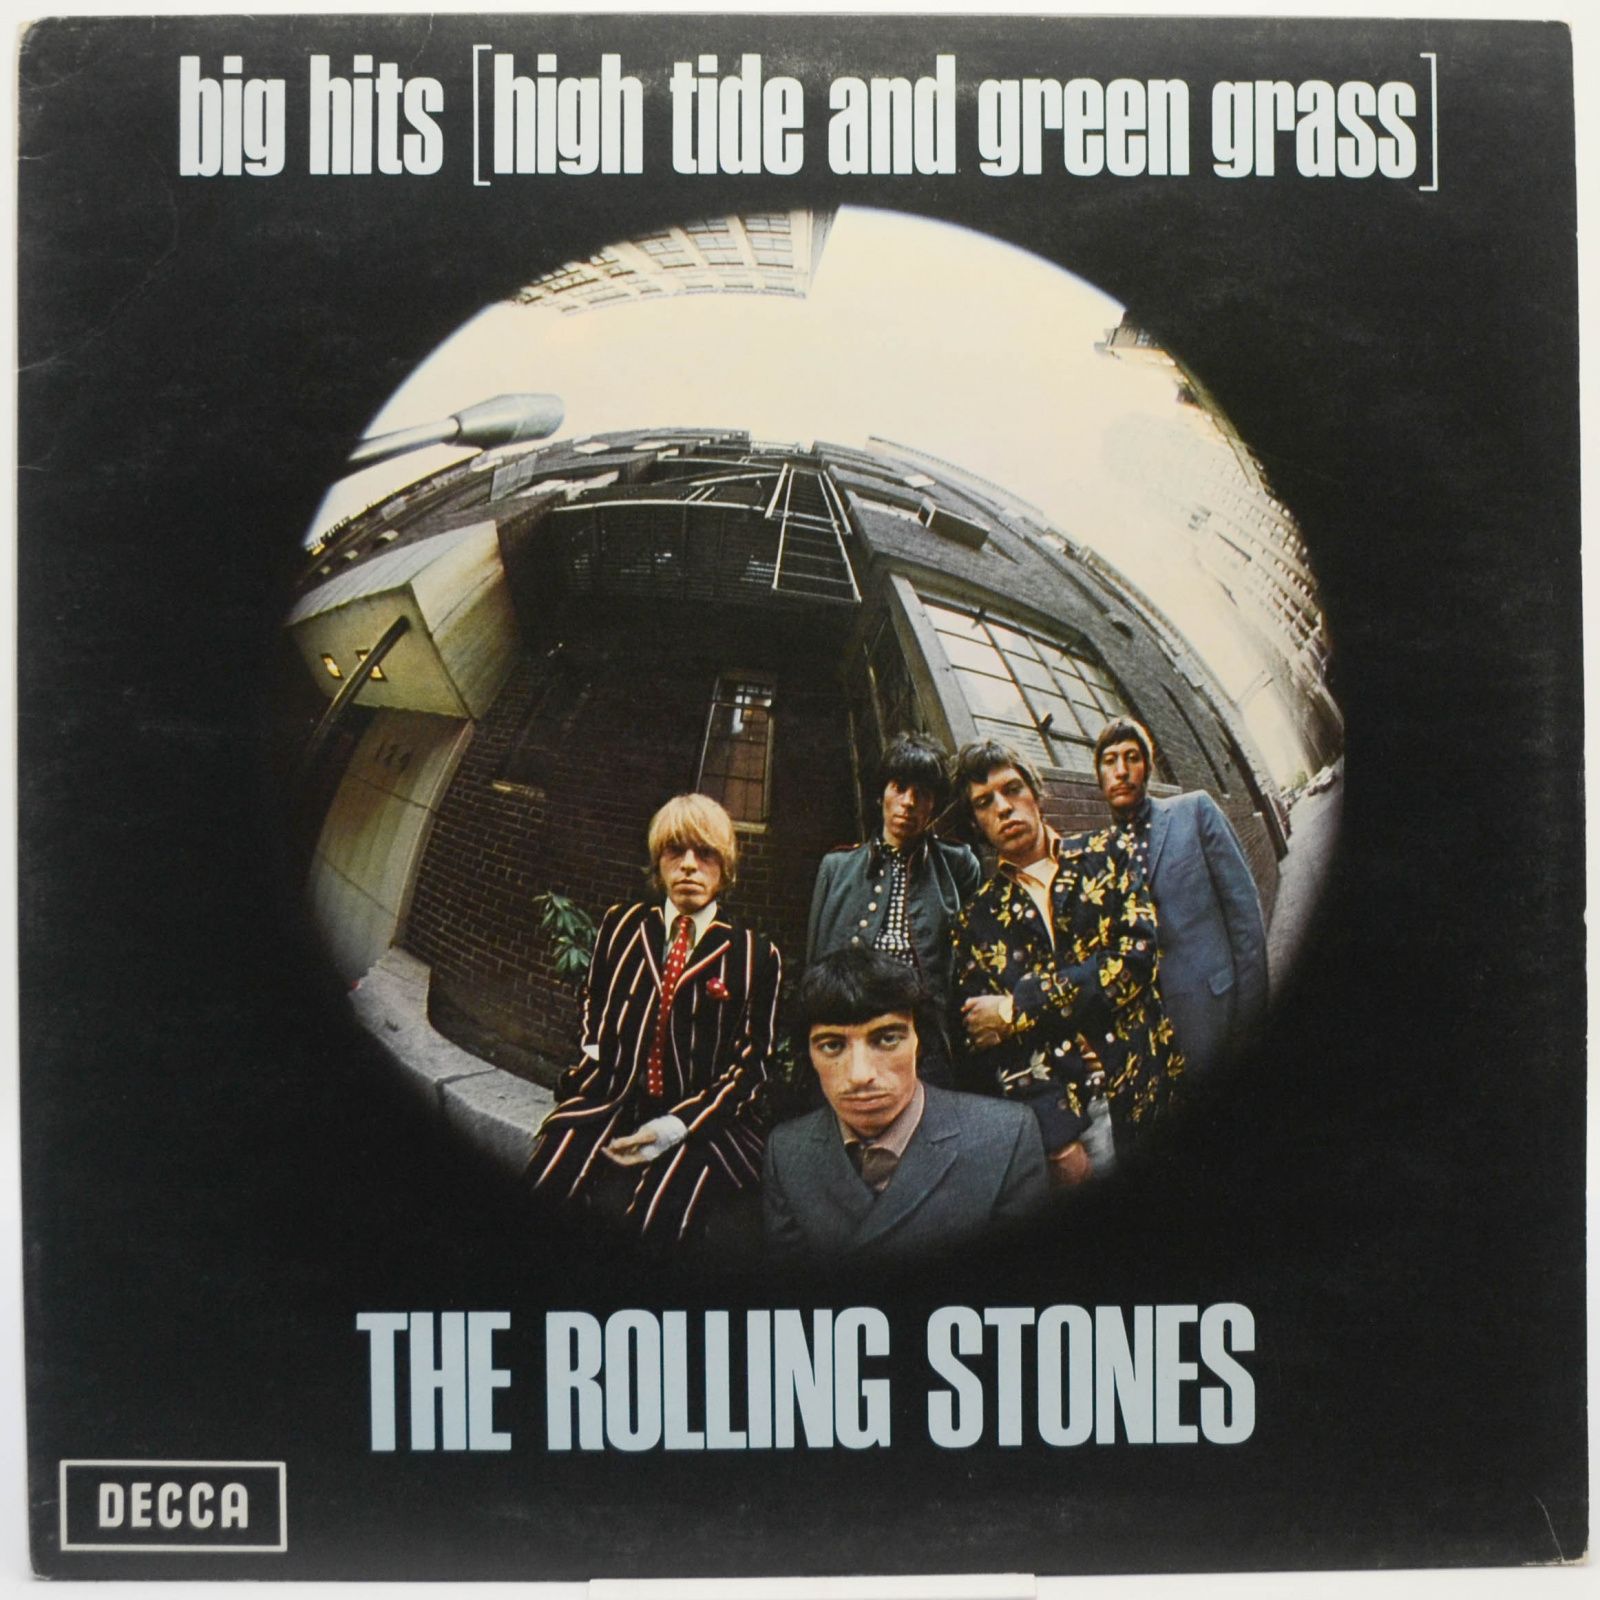 Rolling Stones — Big Hits [High Tide And Green Grass] (UK), 1966